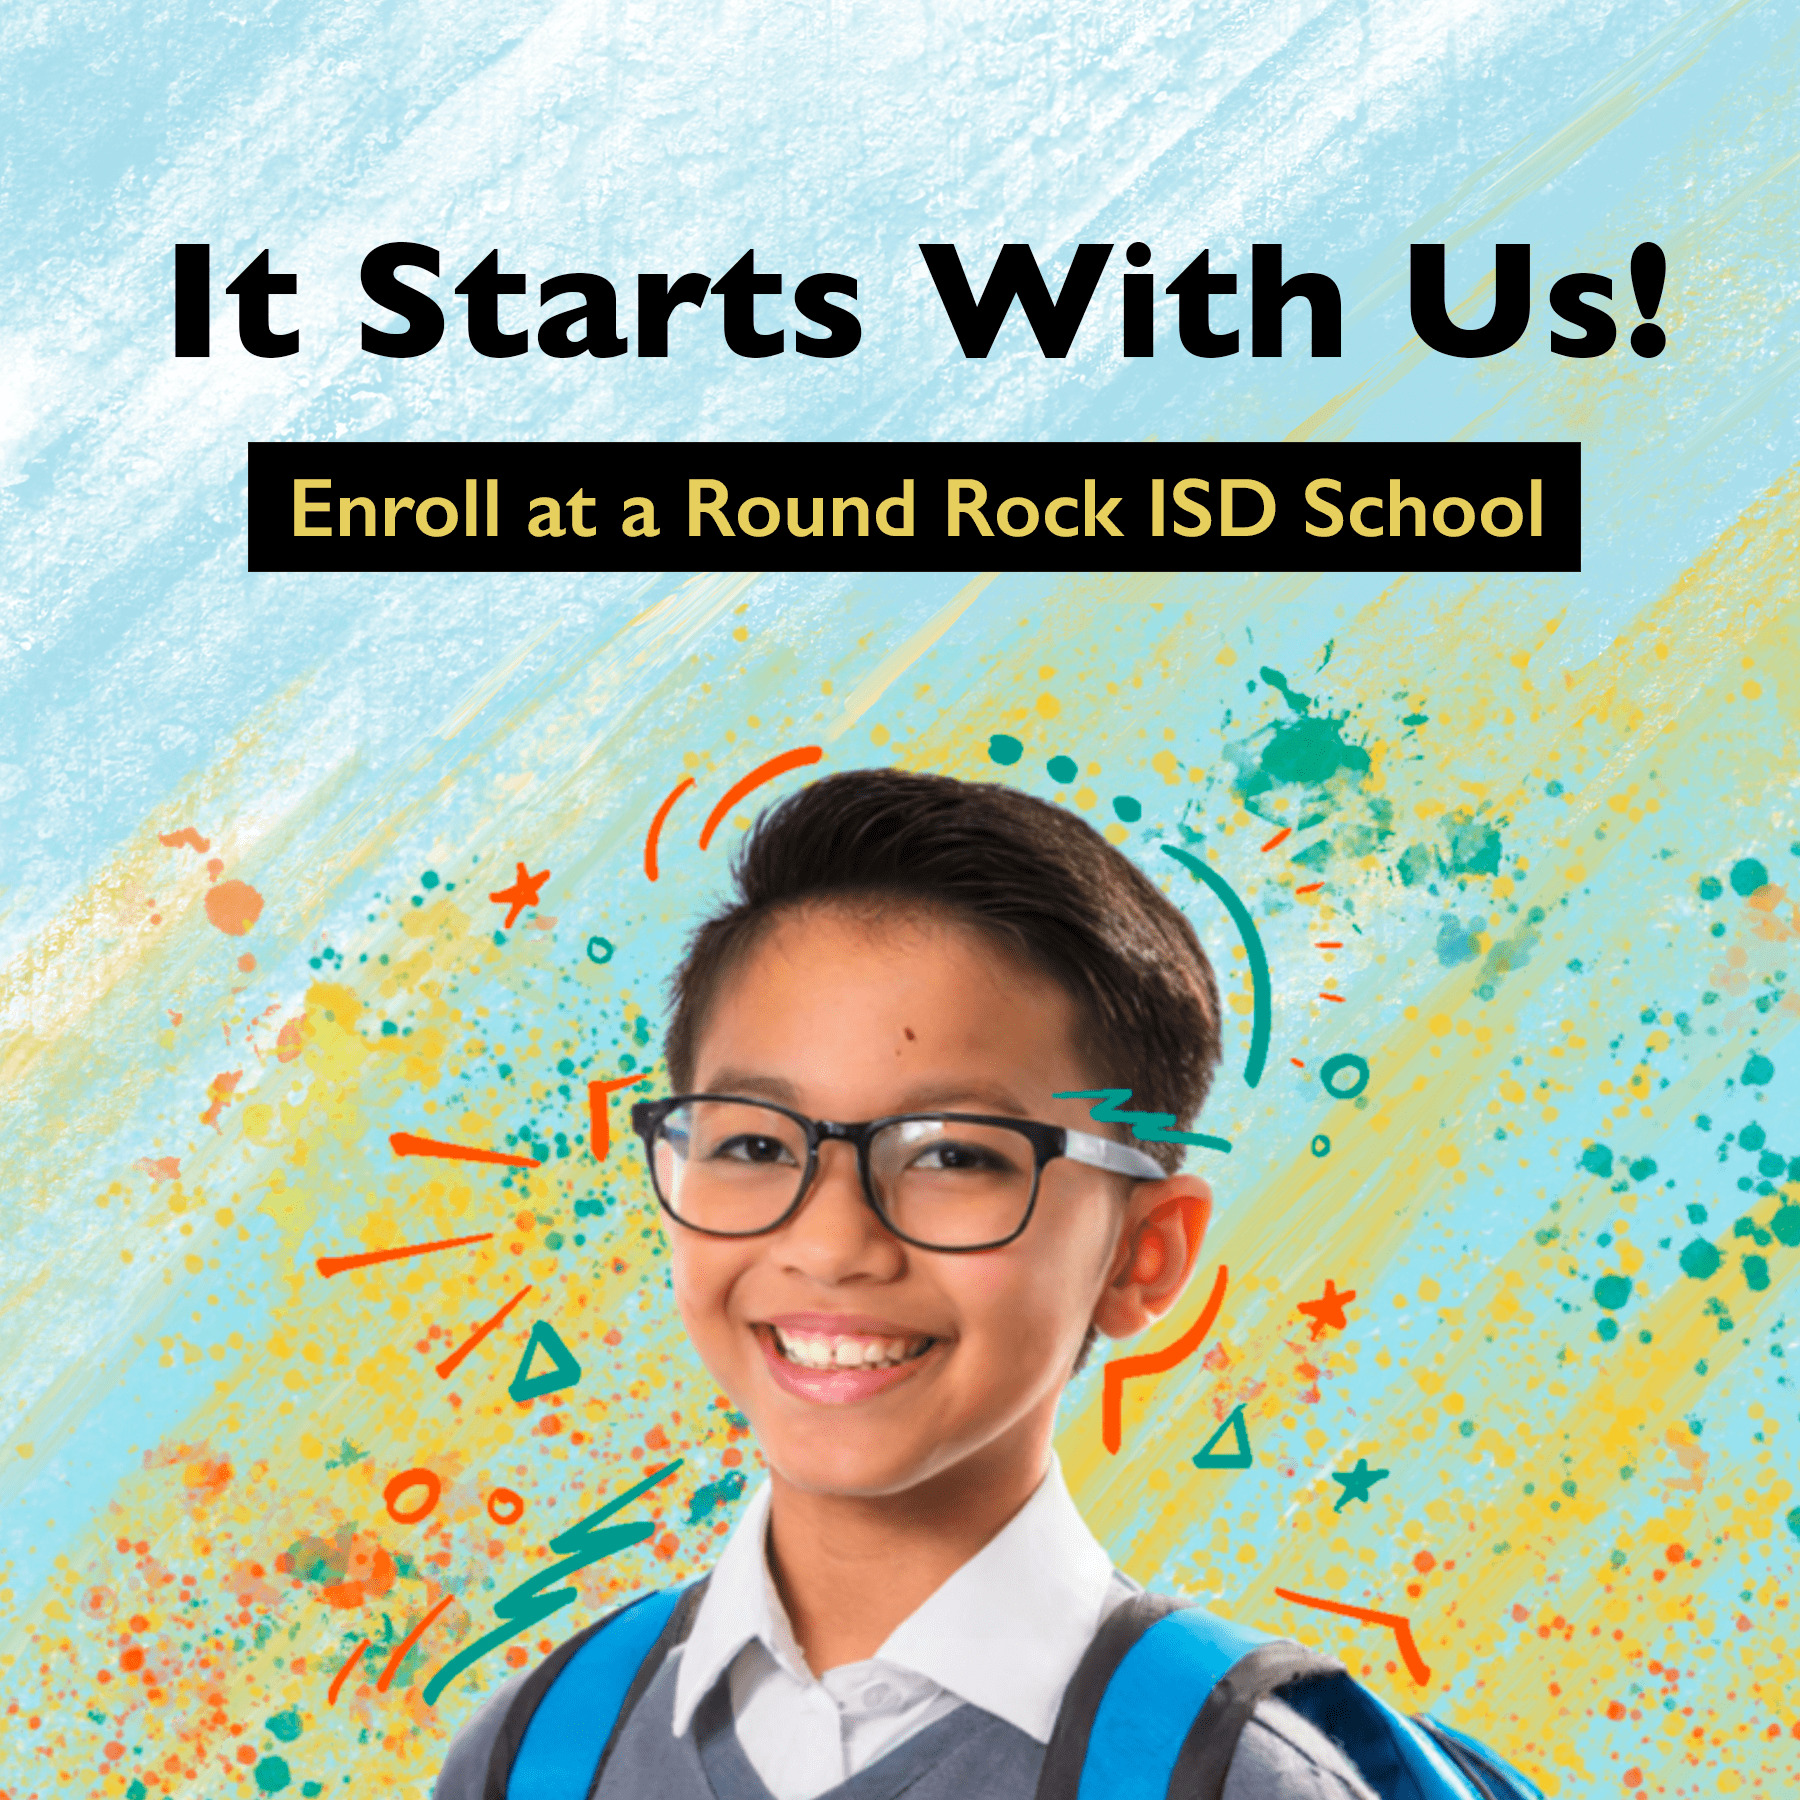 It Starts With Us! Enroll at a Round Rock ISD School